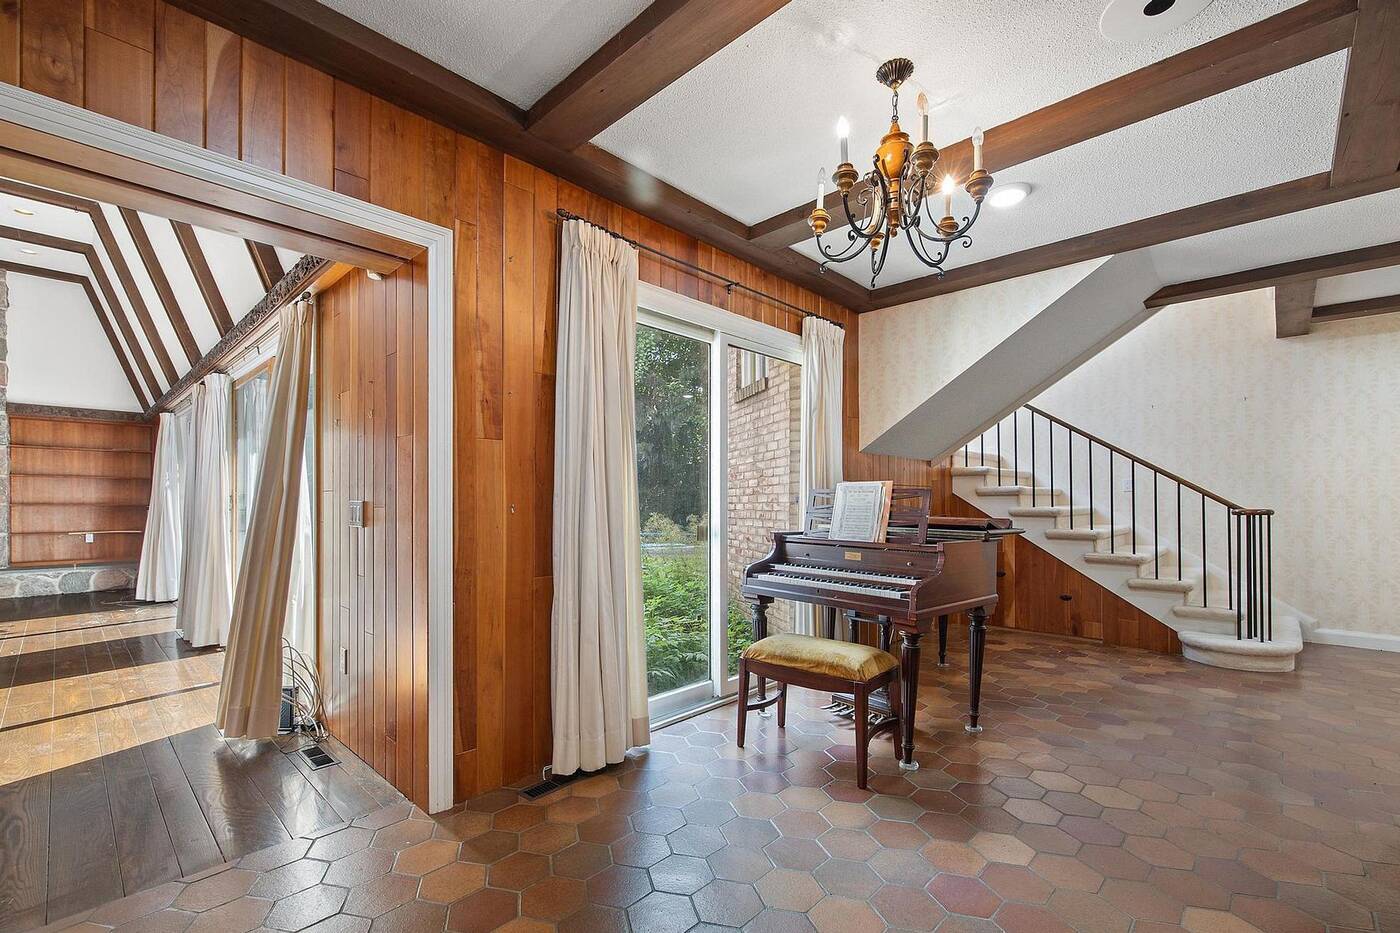 This $5 million Toronto home hasn't been on the market since the 60s